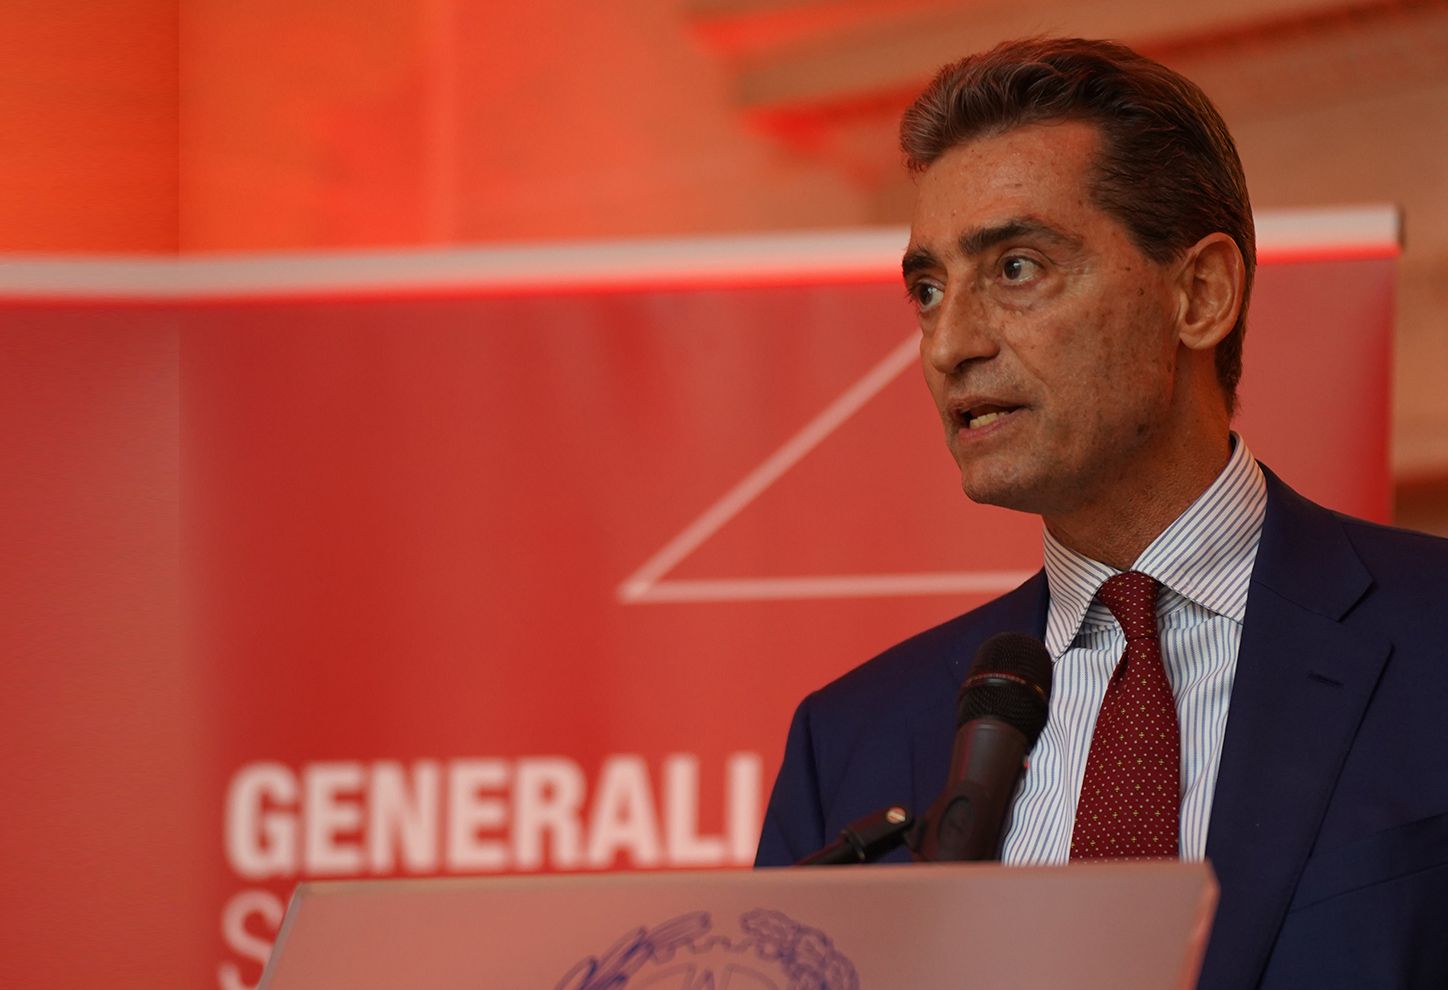 Generali: insurance sector can boost green and digital development in Europe